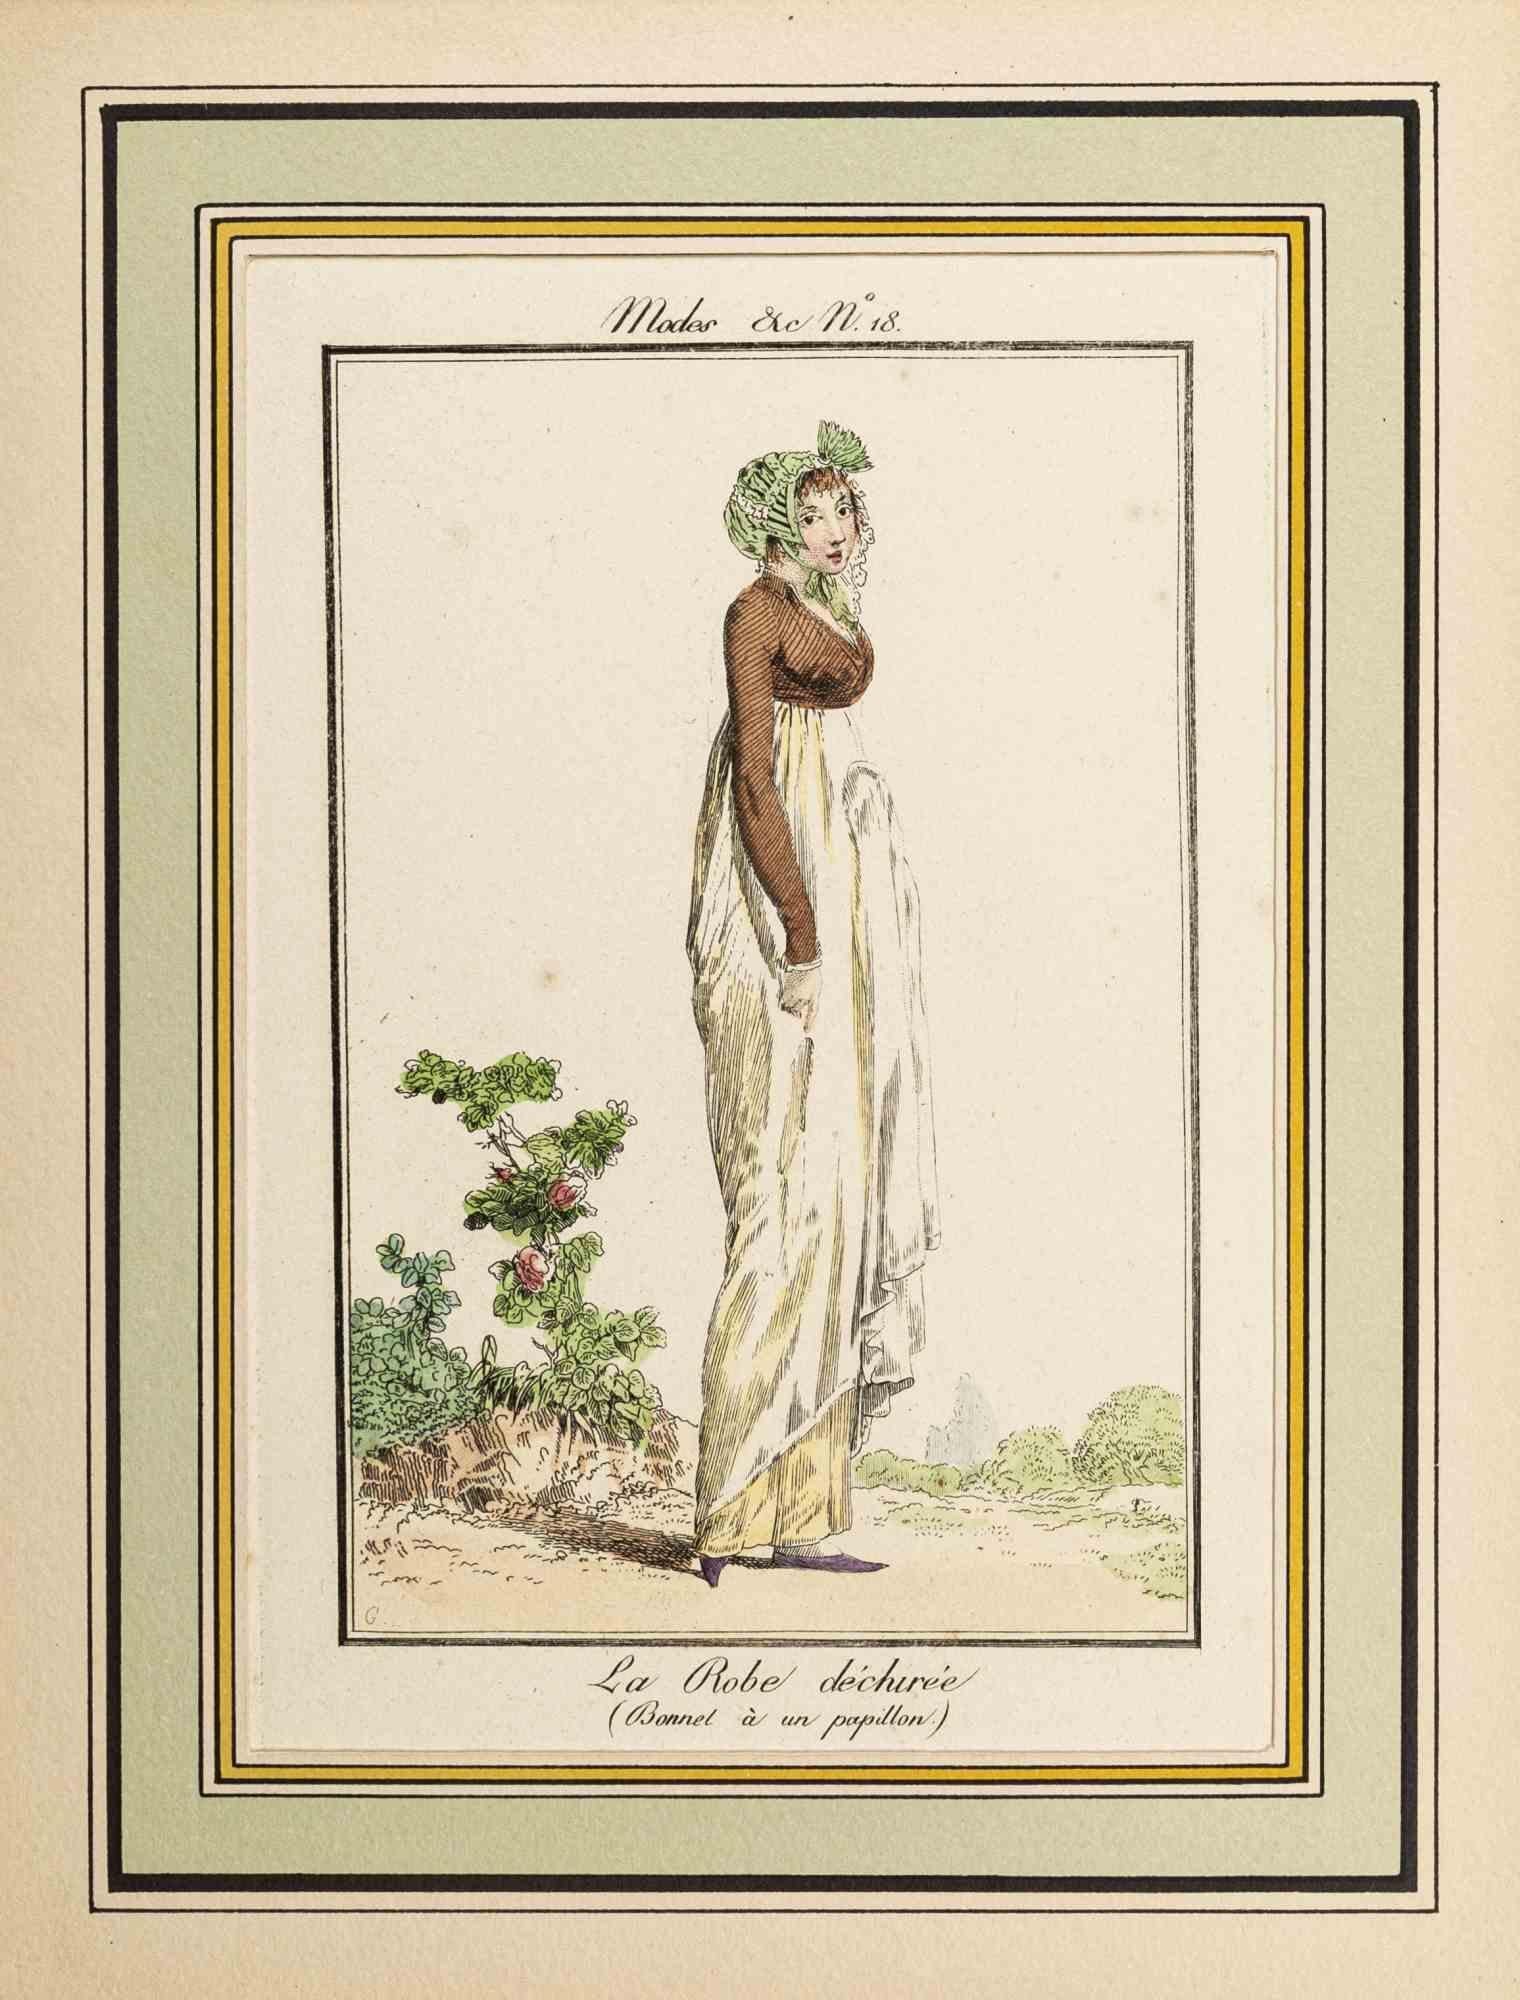 La Robe Dechirée is an Original Etching Hand Watercolored series "Costumes Parisiens" published in 1797 by the Journald des Dames et des Modes".

Costume Parisien - Model n.  is 18 an original watercolored print realized in 1797. 

The artwork is